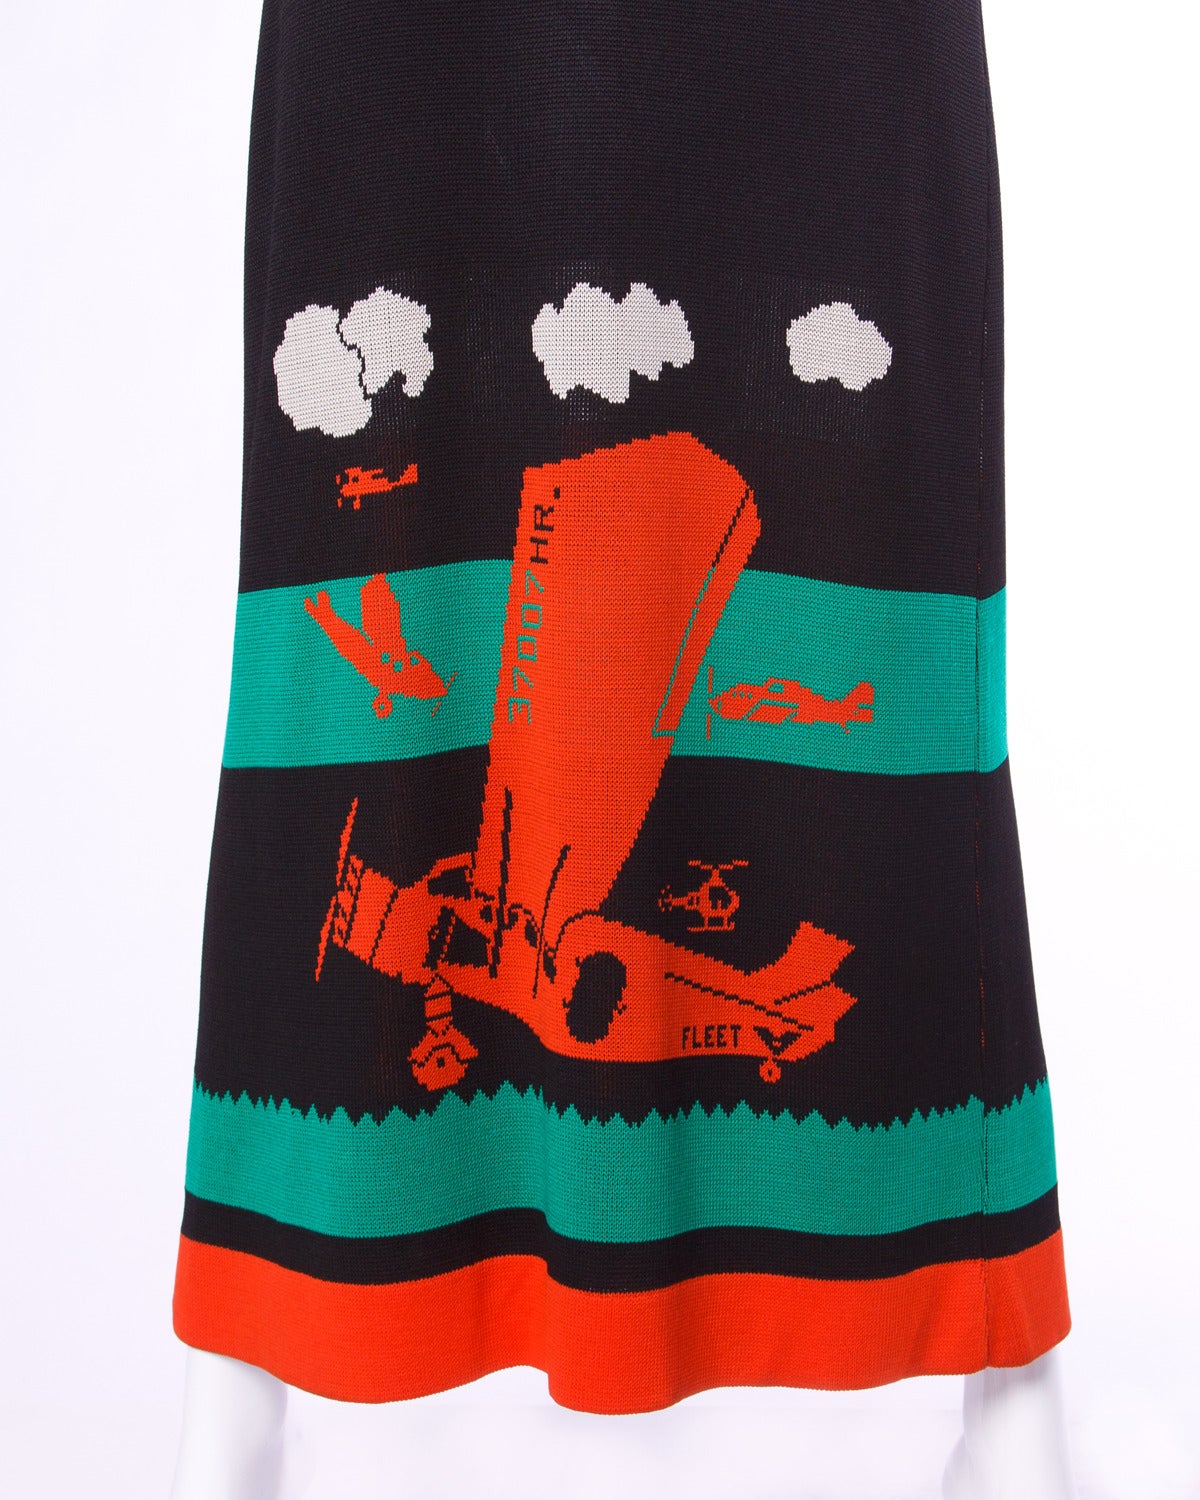 Iconic Giorgio Sant'Angelo knit maxi dress with a colorful airplane design. A collector's piece!

Details:

Unlined
No Closure/ Fabric Contains Stretch
Marked Size: Not Marked
Estimated Size: Small
Color: Orange Red/ Black/ Green/